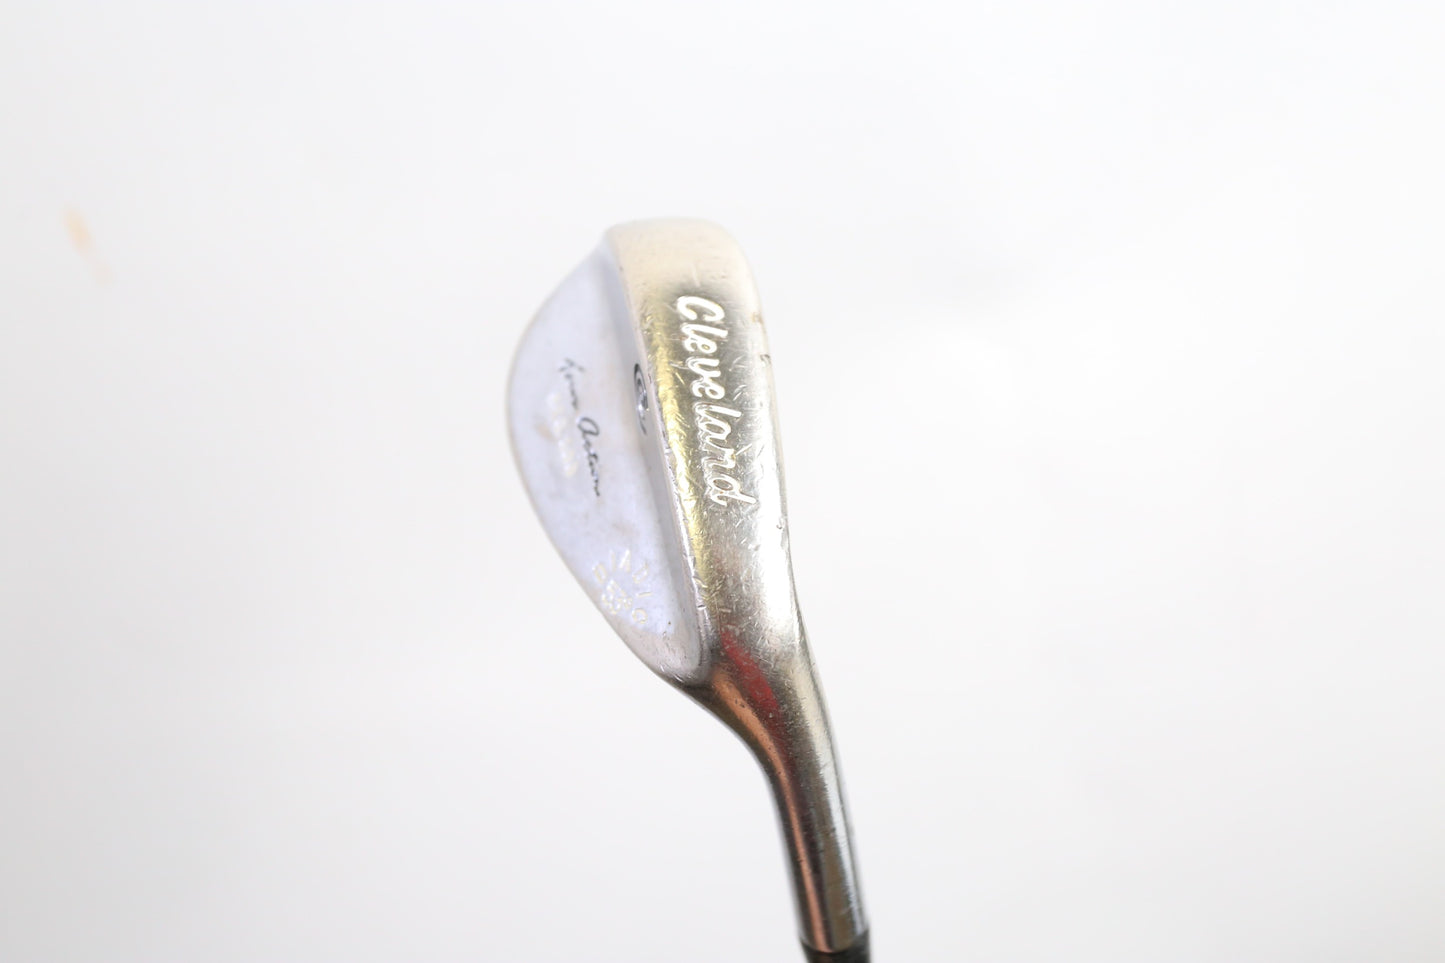 Used Cleveland 588 Tour Satin Chrome Gap Wedge - Right-Handed - 53 Degrees - Stiff Flex